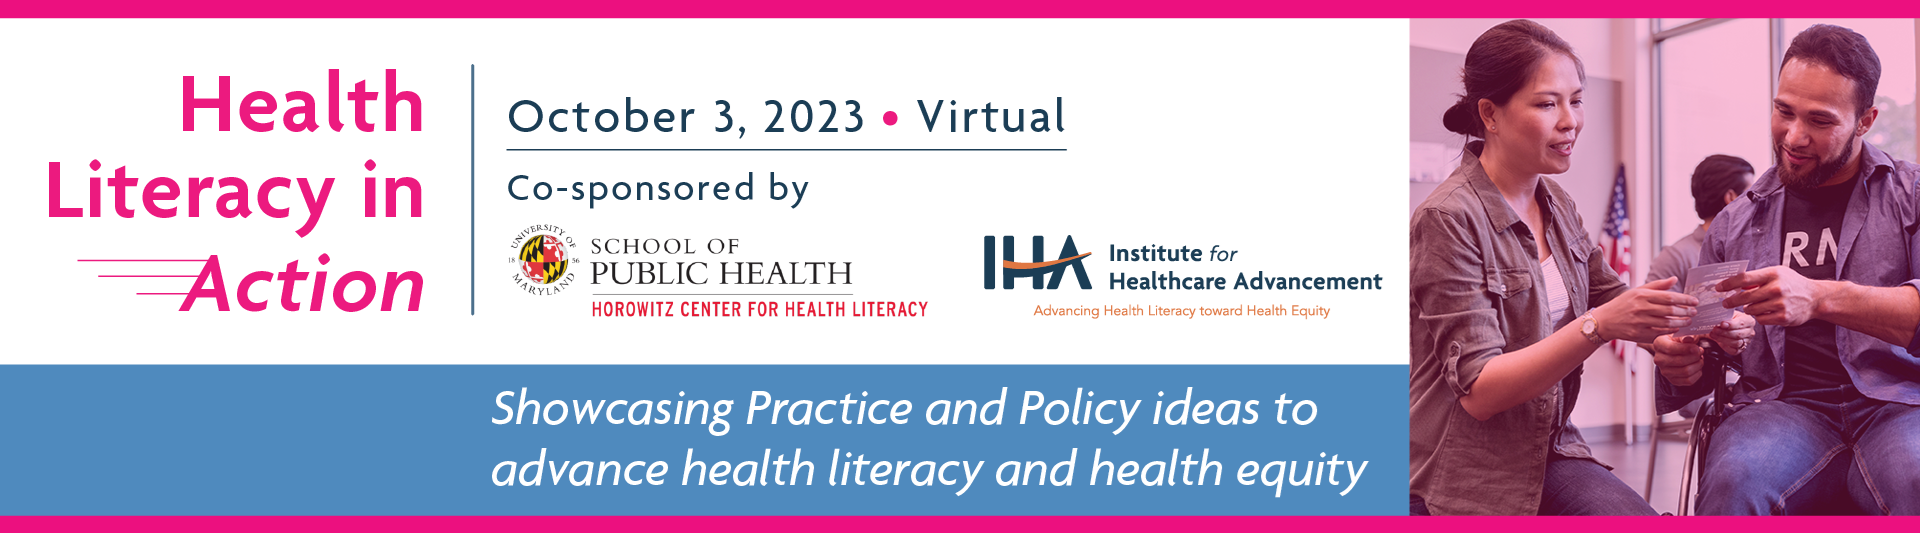 6th Annual Health Literacy in Action Conference